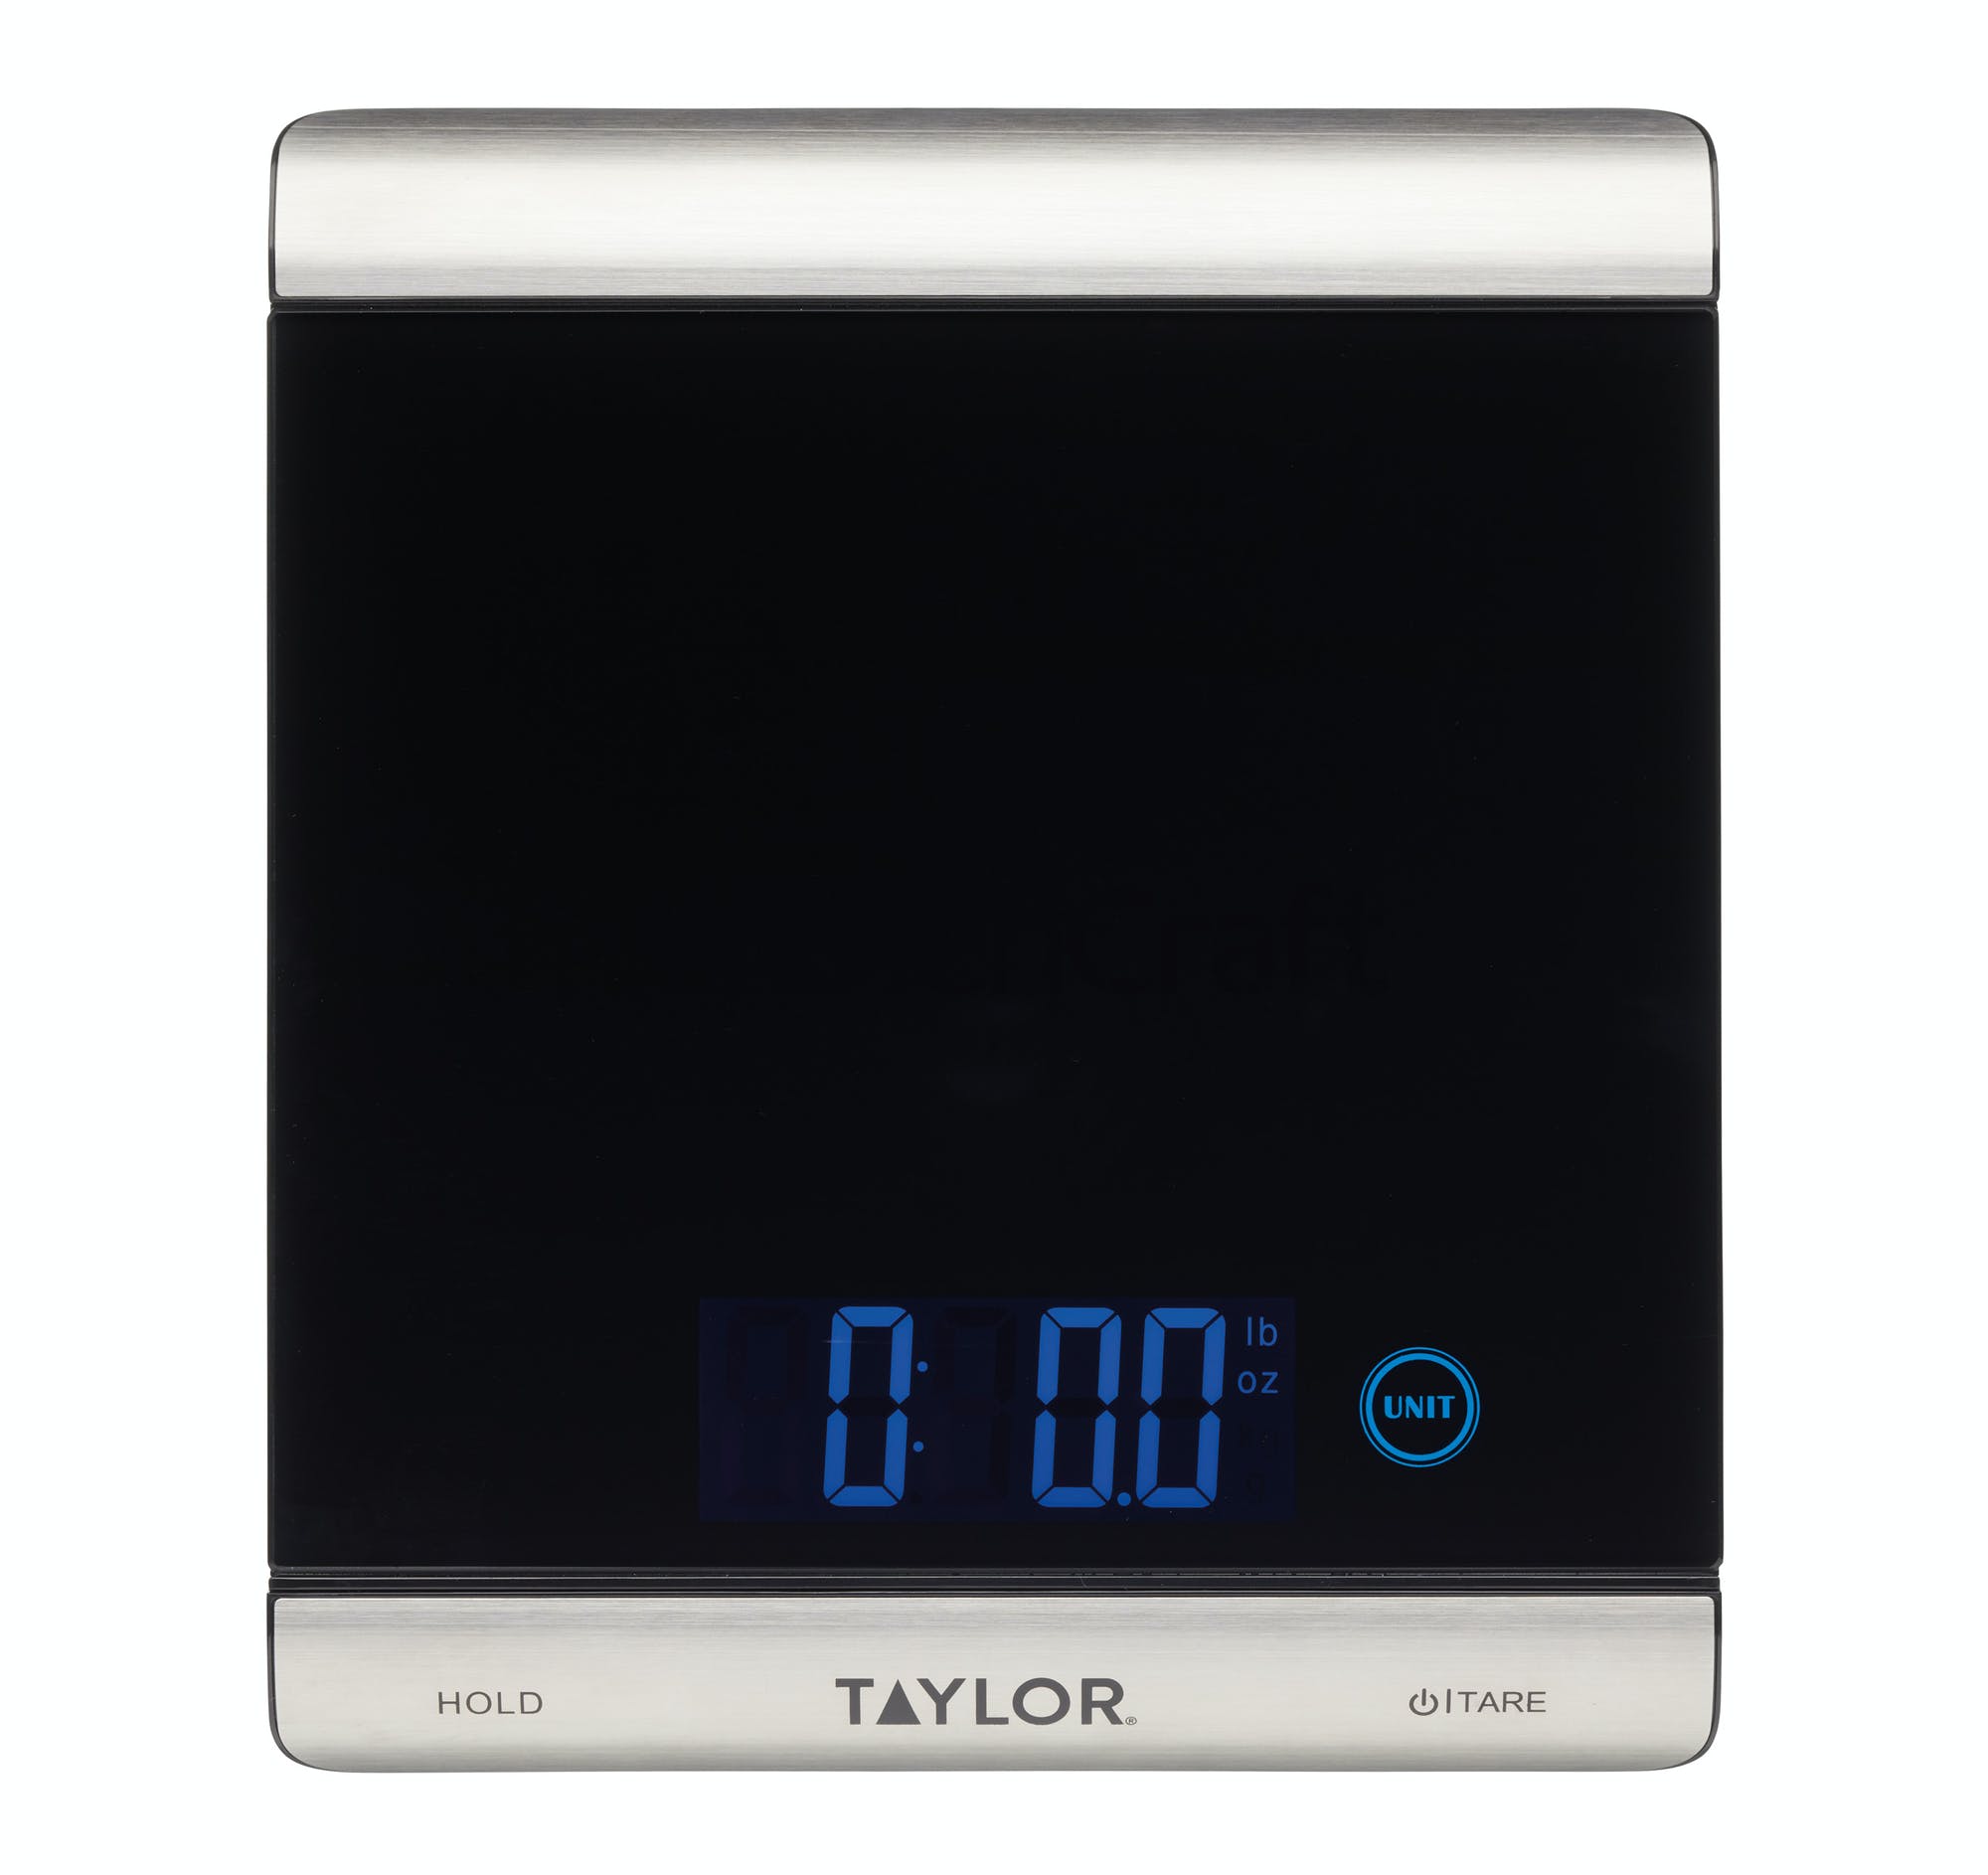 Taylor High Capacity Digital Glass Kitchen Scale: TYPSCALE15HC